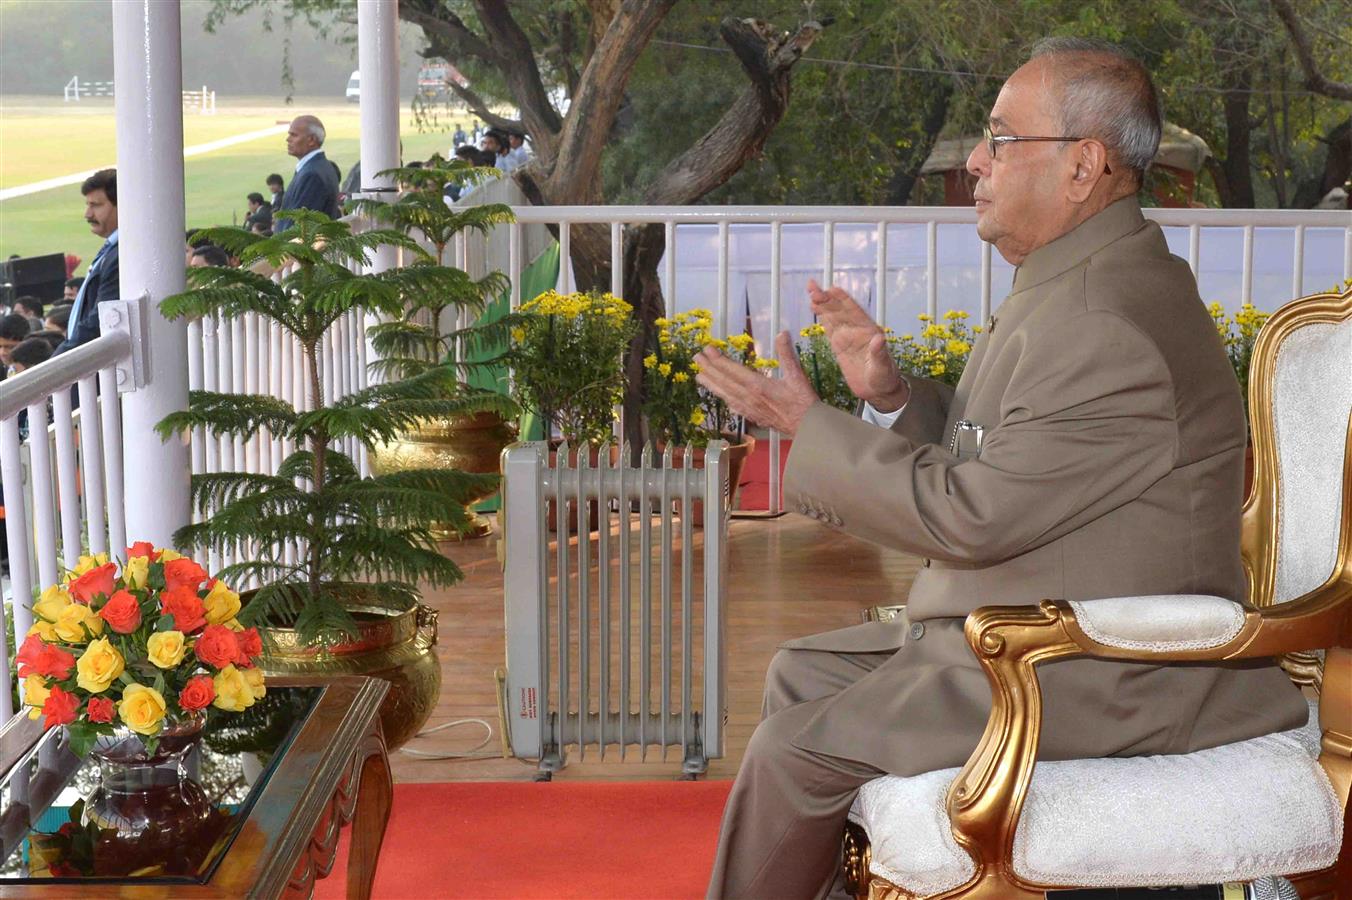  The President of India, Shri Pranab Mukherjee witnessing the President's Polo Cup Exhibition match at PBG Parade Ground (Polo Field) on December 3, 2016.